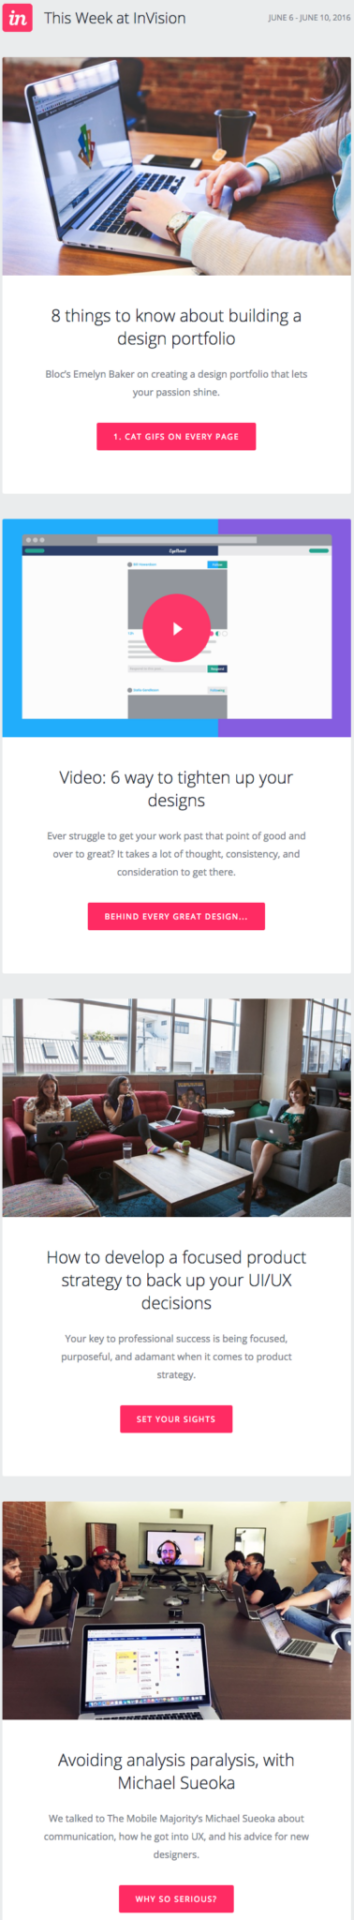 invision newsletter email